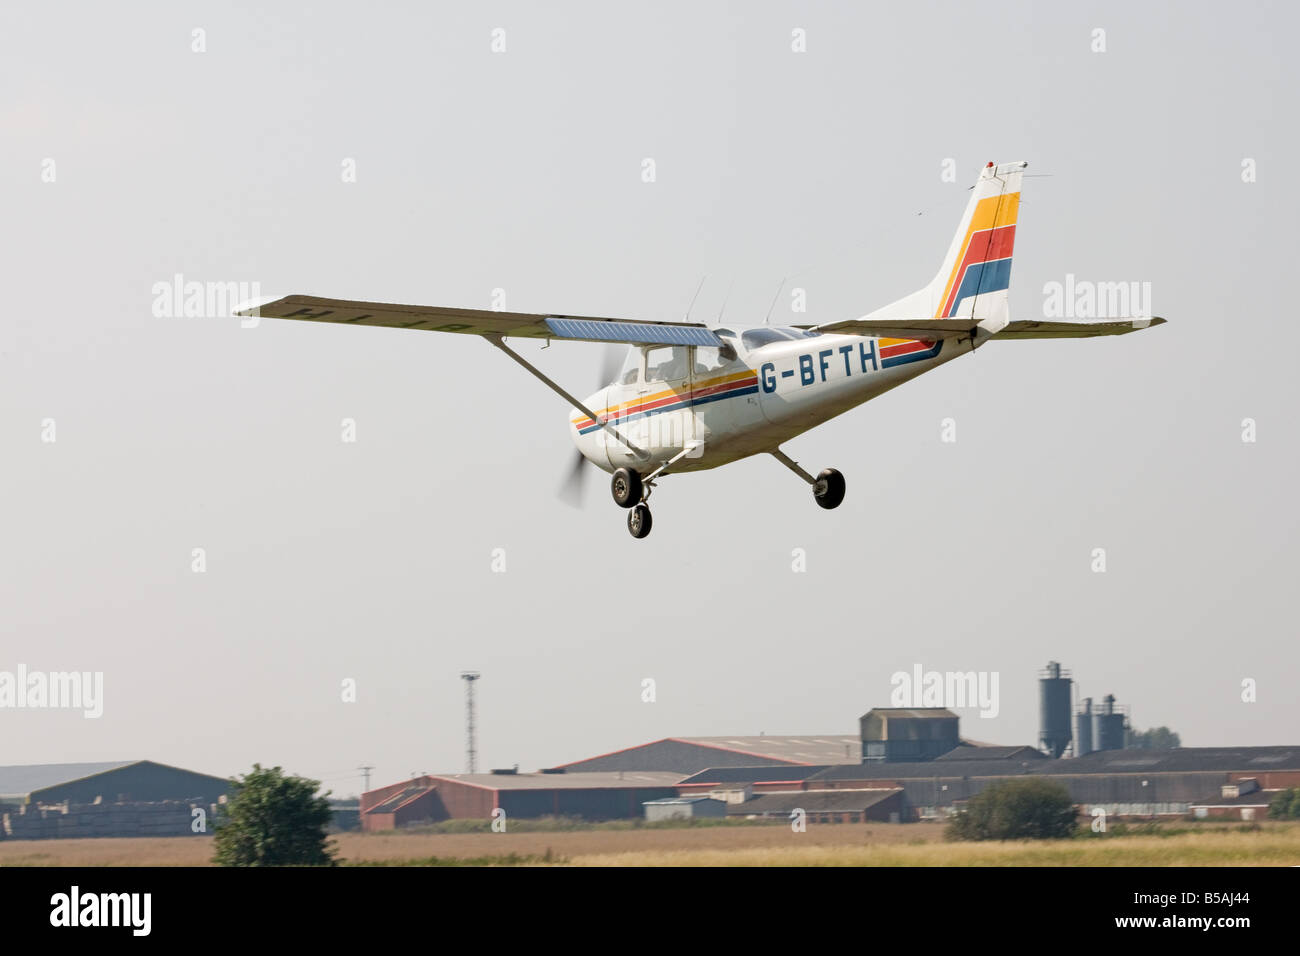 Reims Cessna F172N Skyhawk G-BFTH about to land at Sandtoft Airfield Stock Photo